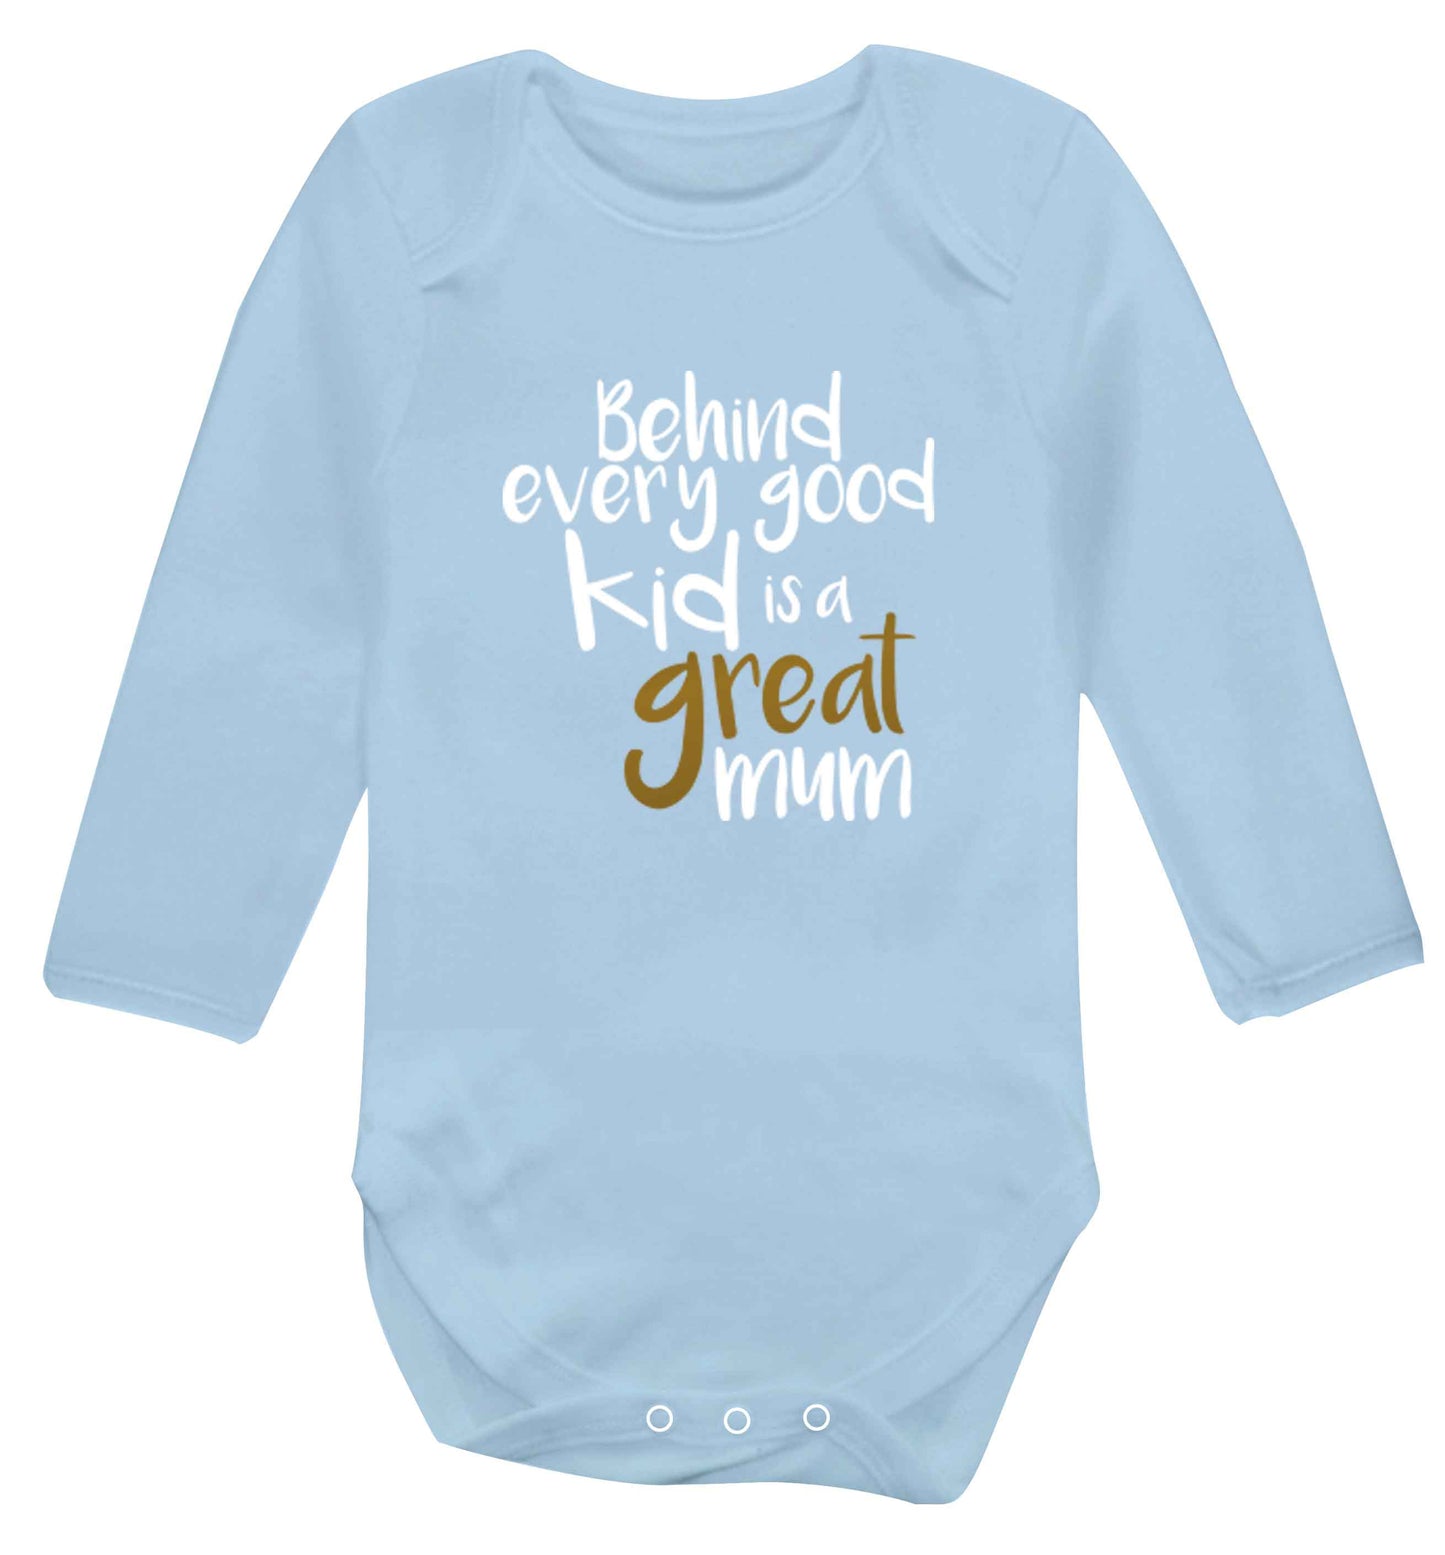 Behind every good kid is a great mum baby vest long sleeved pale blue 6-12 months